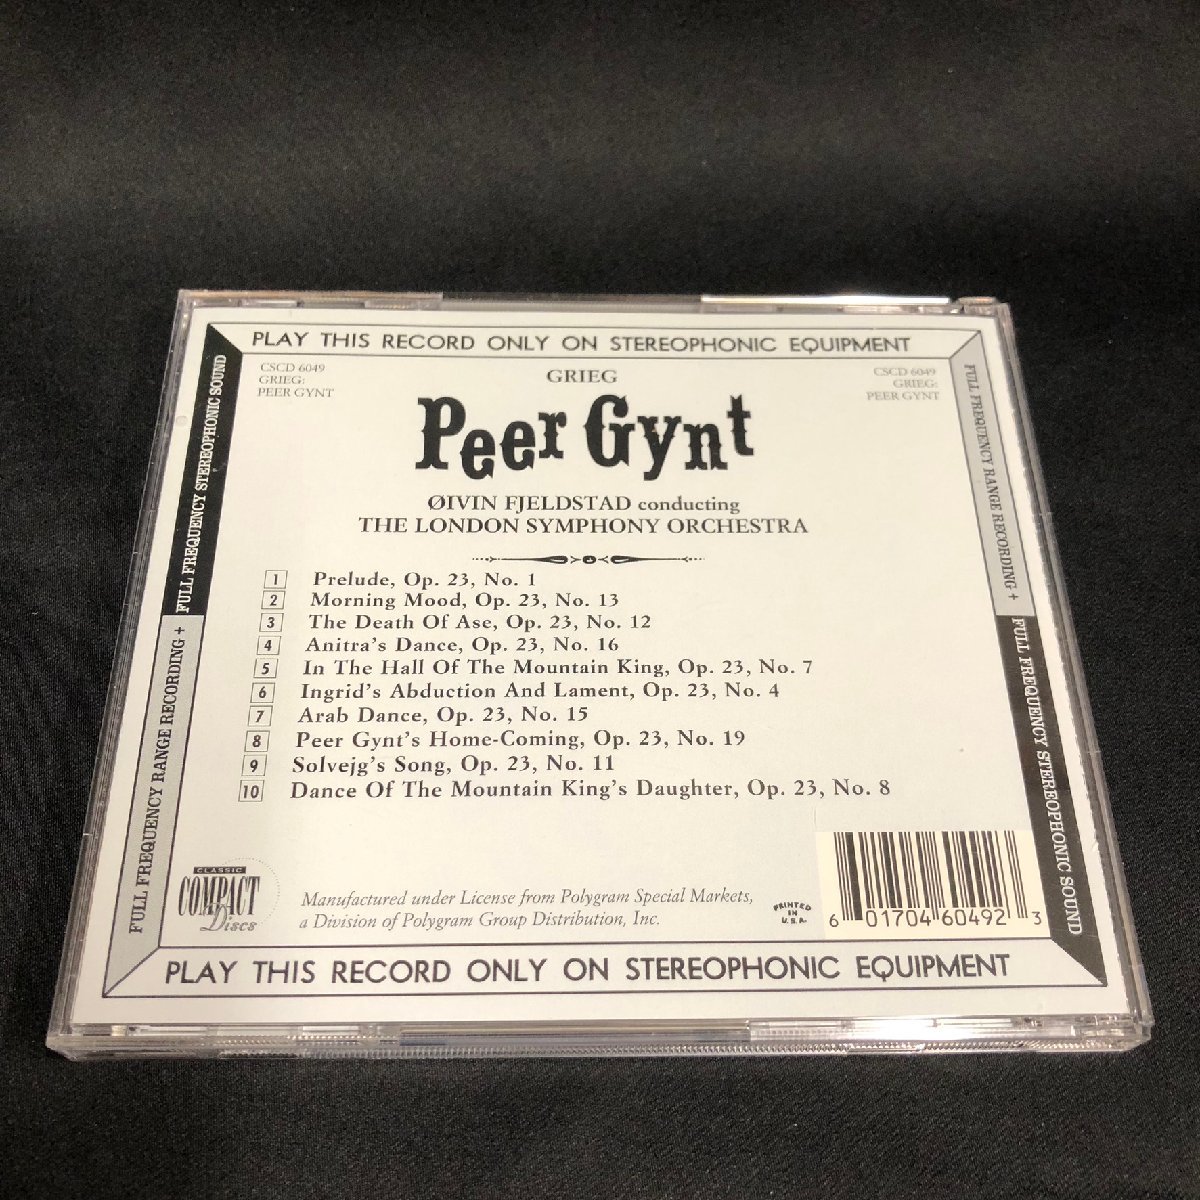 【GOLD CD】OIVEN FJELDSTAD GRIEG PEER GYNT (CLASSIC COMPACT DISCS/CSCD 6049) エイフィン・フィエルスター グリーグ ペール・ギュント_画像2